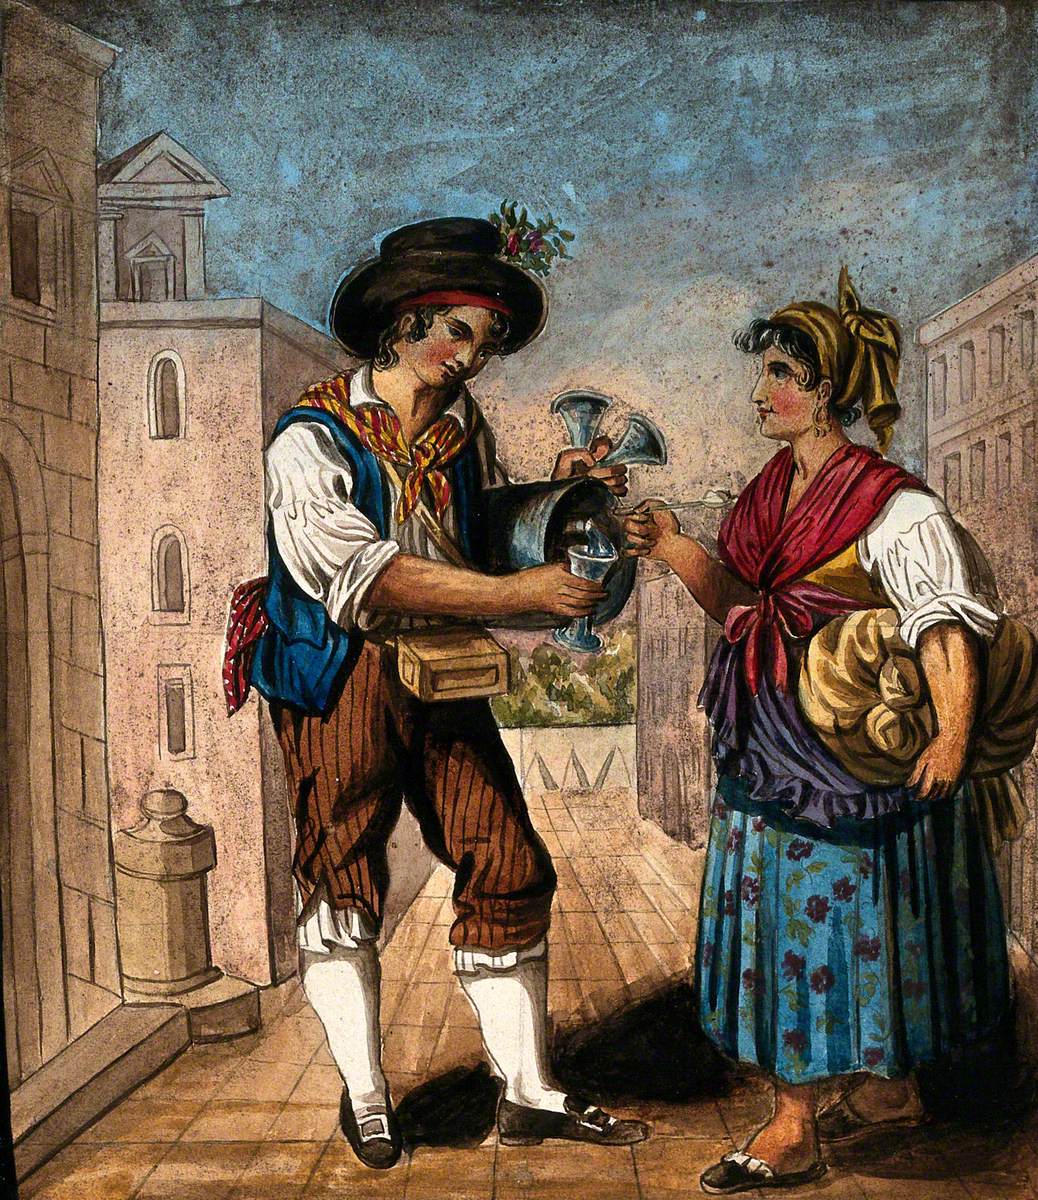 A Water Seller Offers a Glass of Water as Refreshment to a Woman Who Is Carrying a Large Bundle under Her Arm